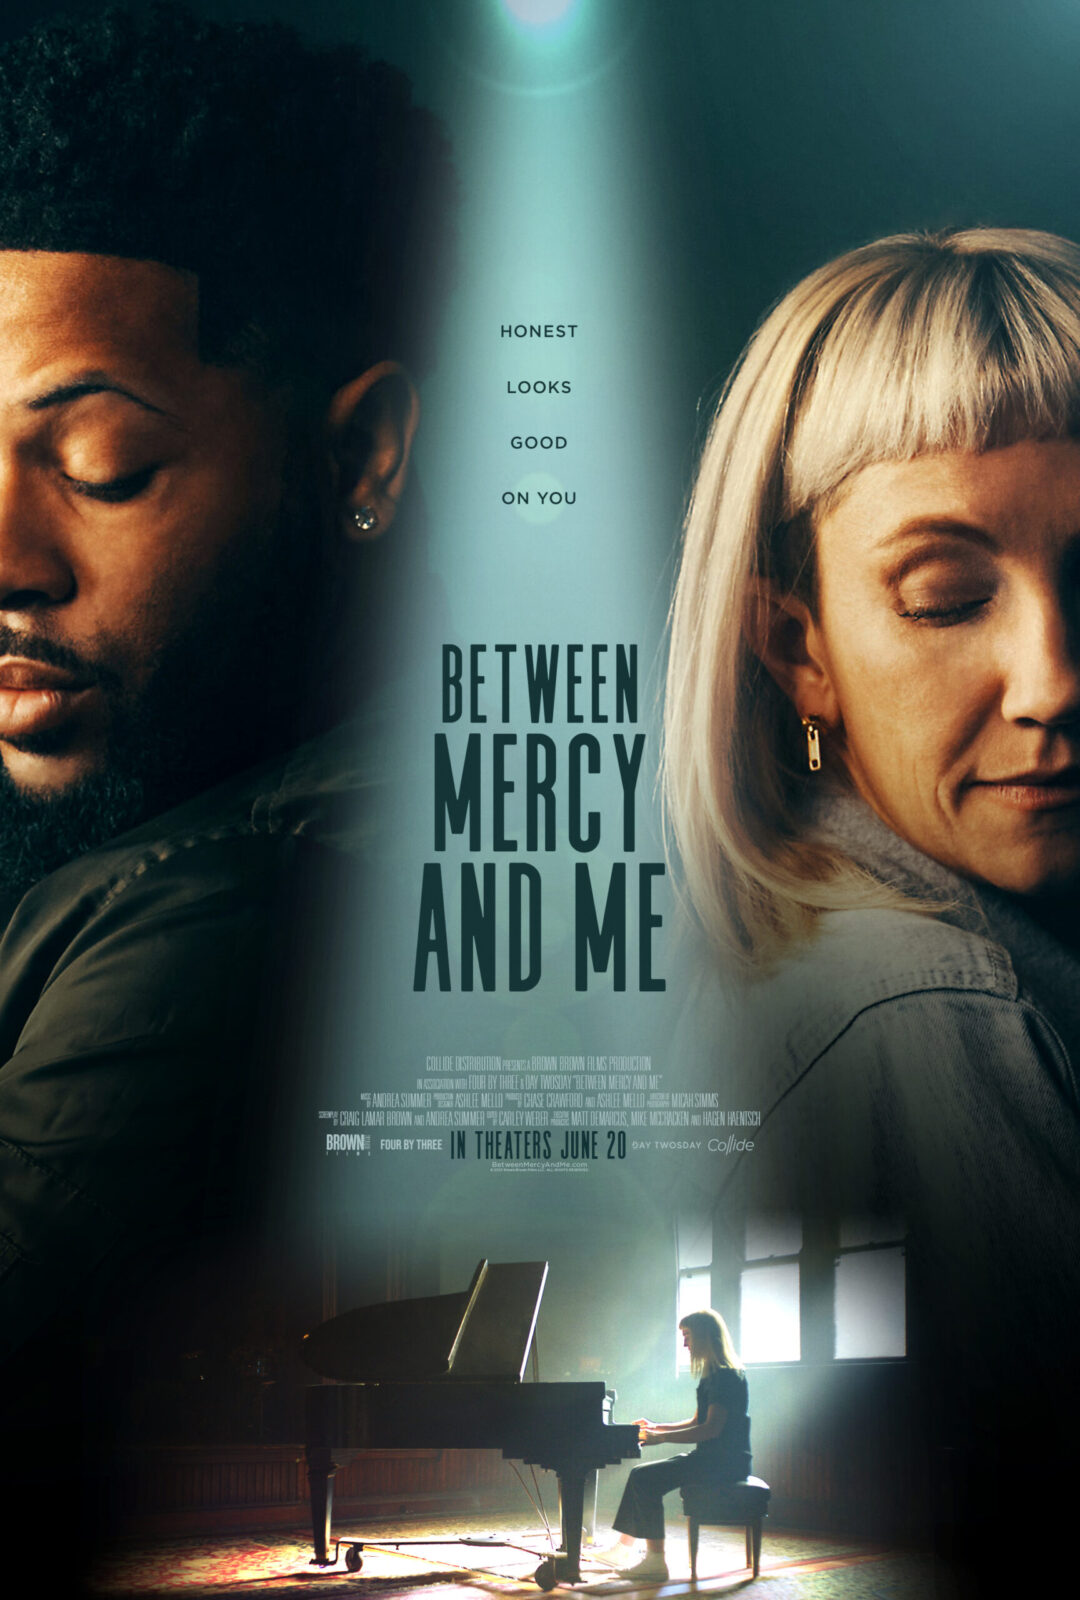 Award-winning faith film ‘Between Mercy and Me’ to release nationwide on June 20